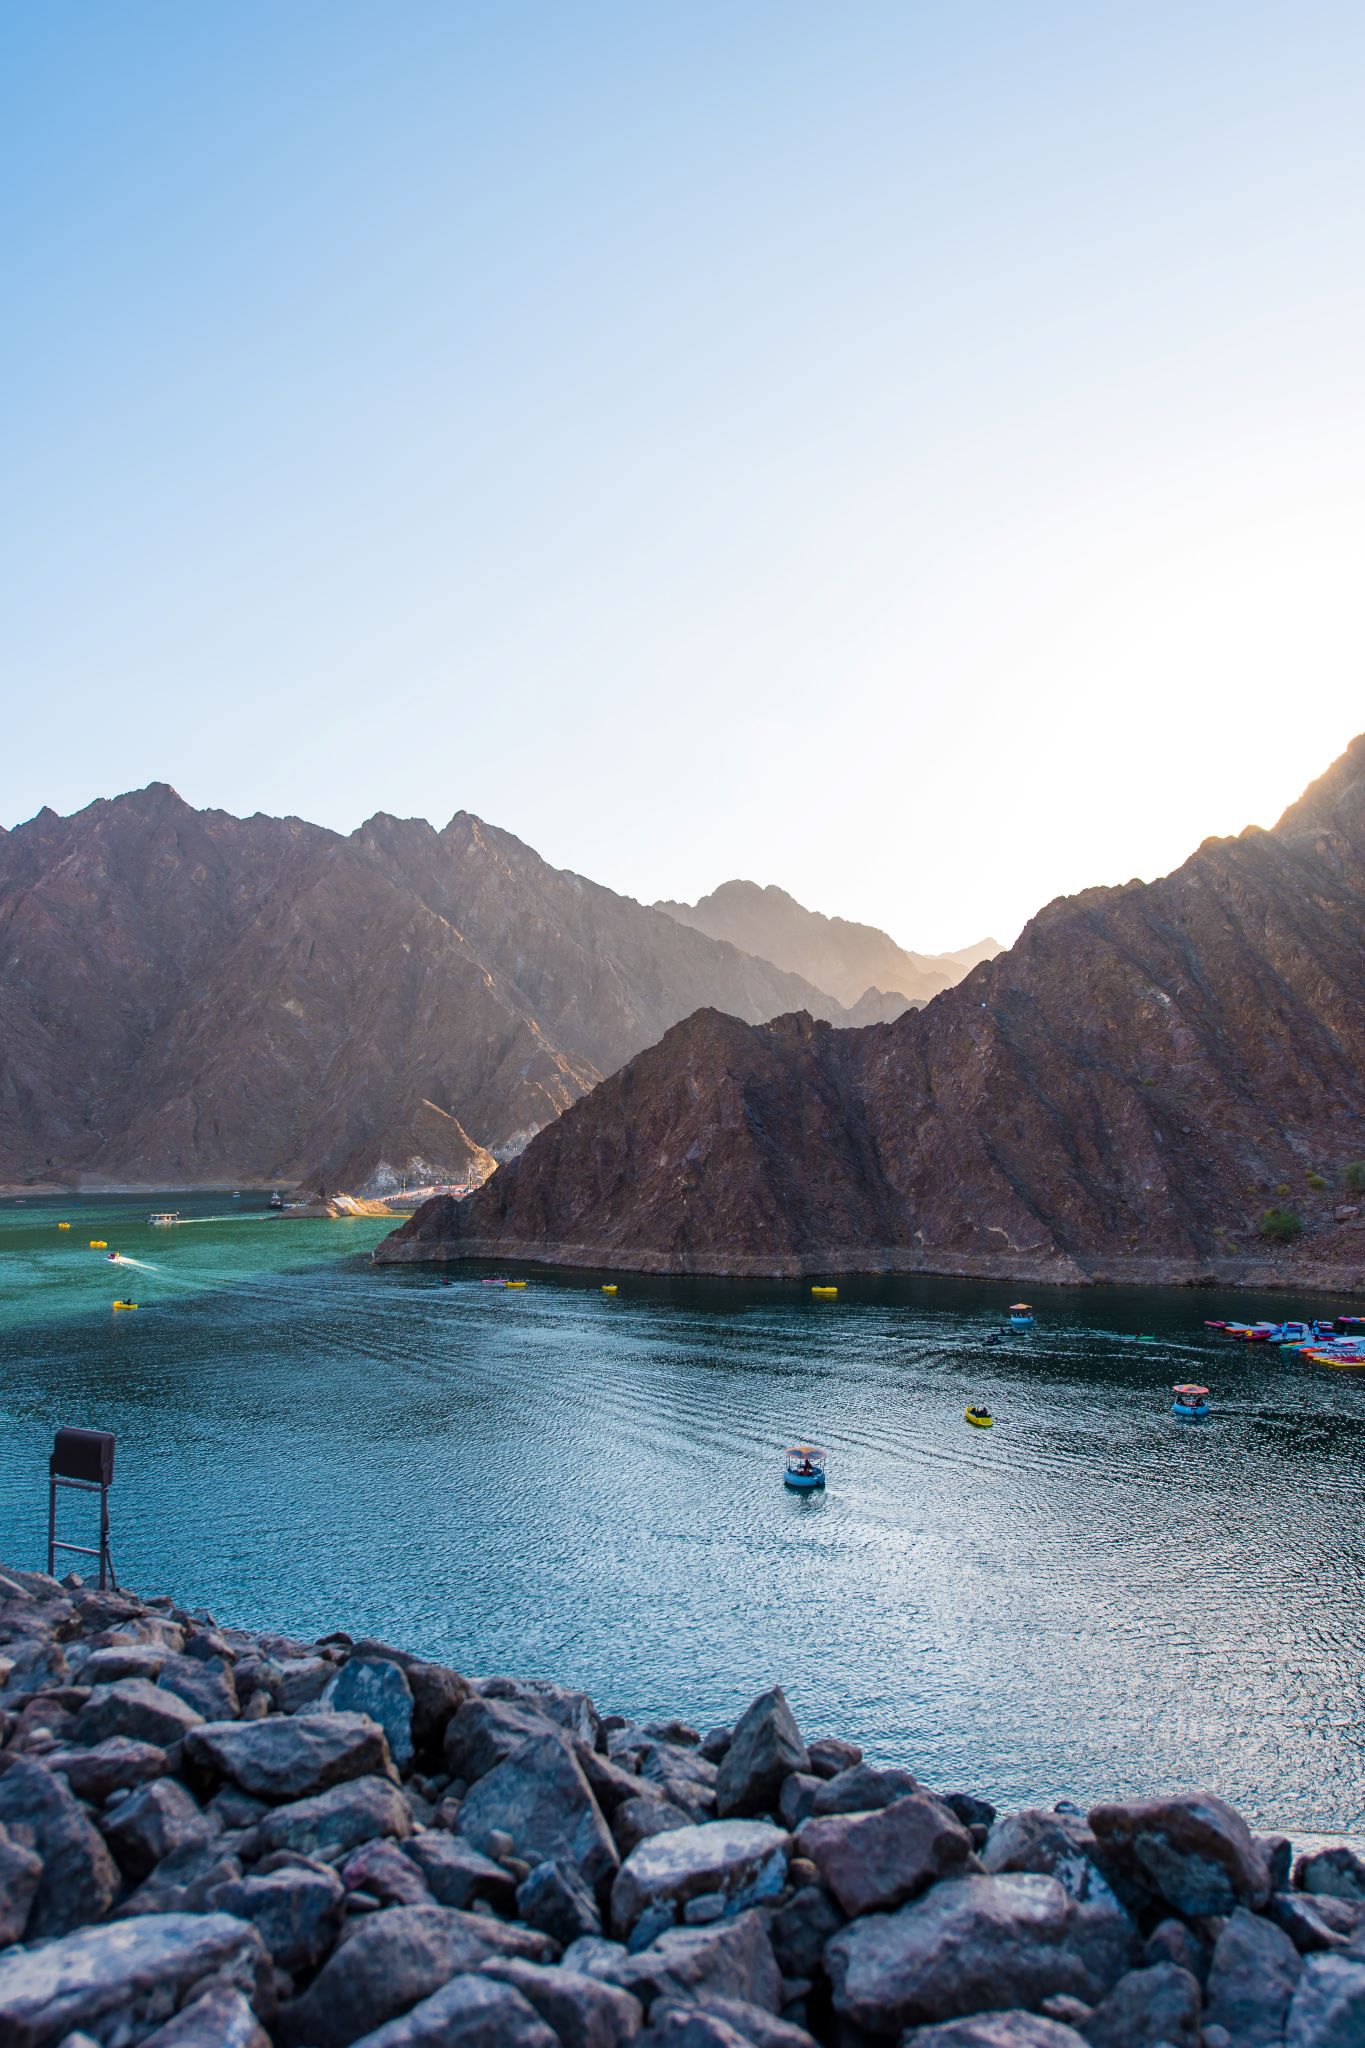 A boat sits on a blue Hatta Lake, the mountains soaring in the background.